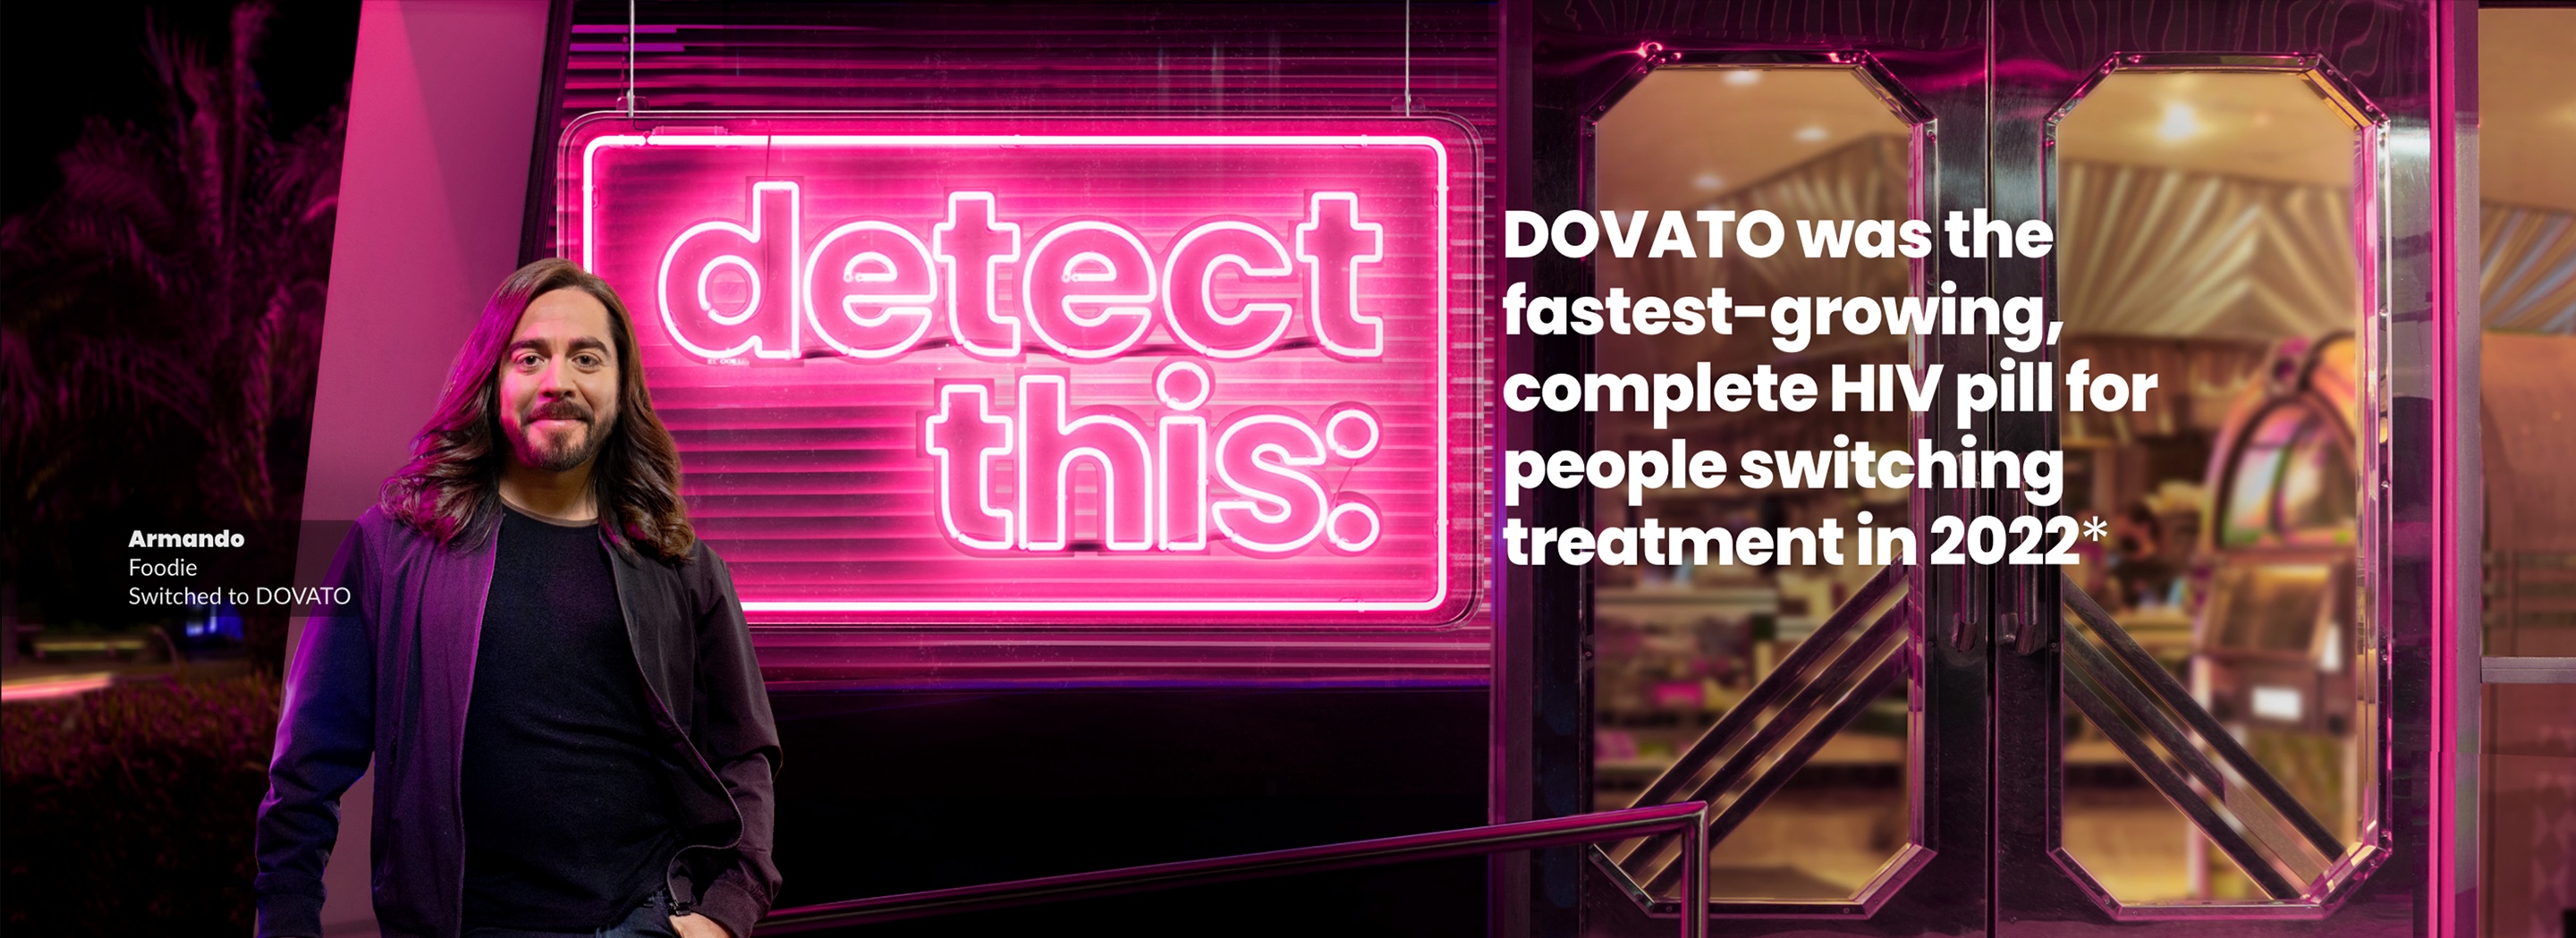 DOVATO was the fastest-growing complete HIV pill for people switching treatment in 2022